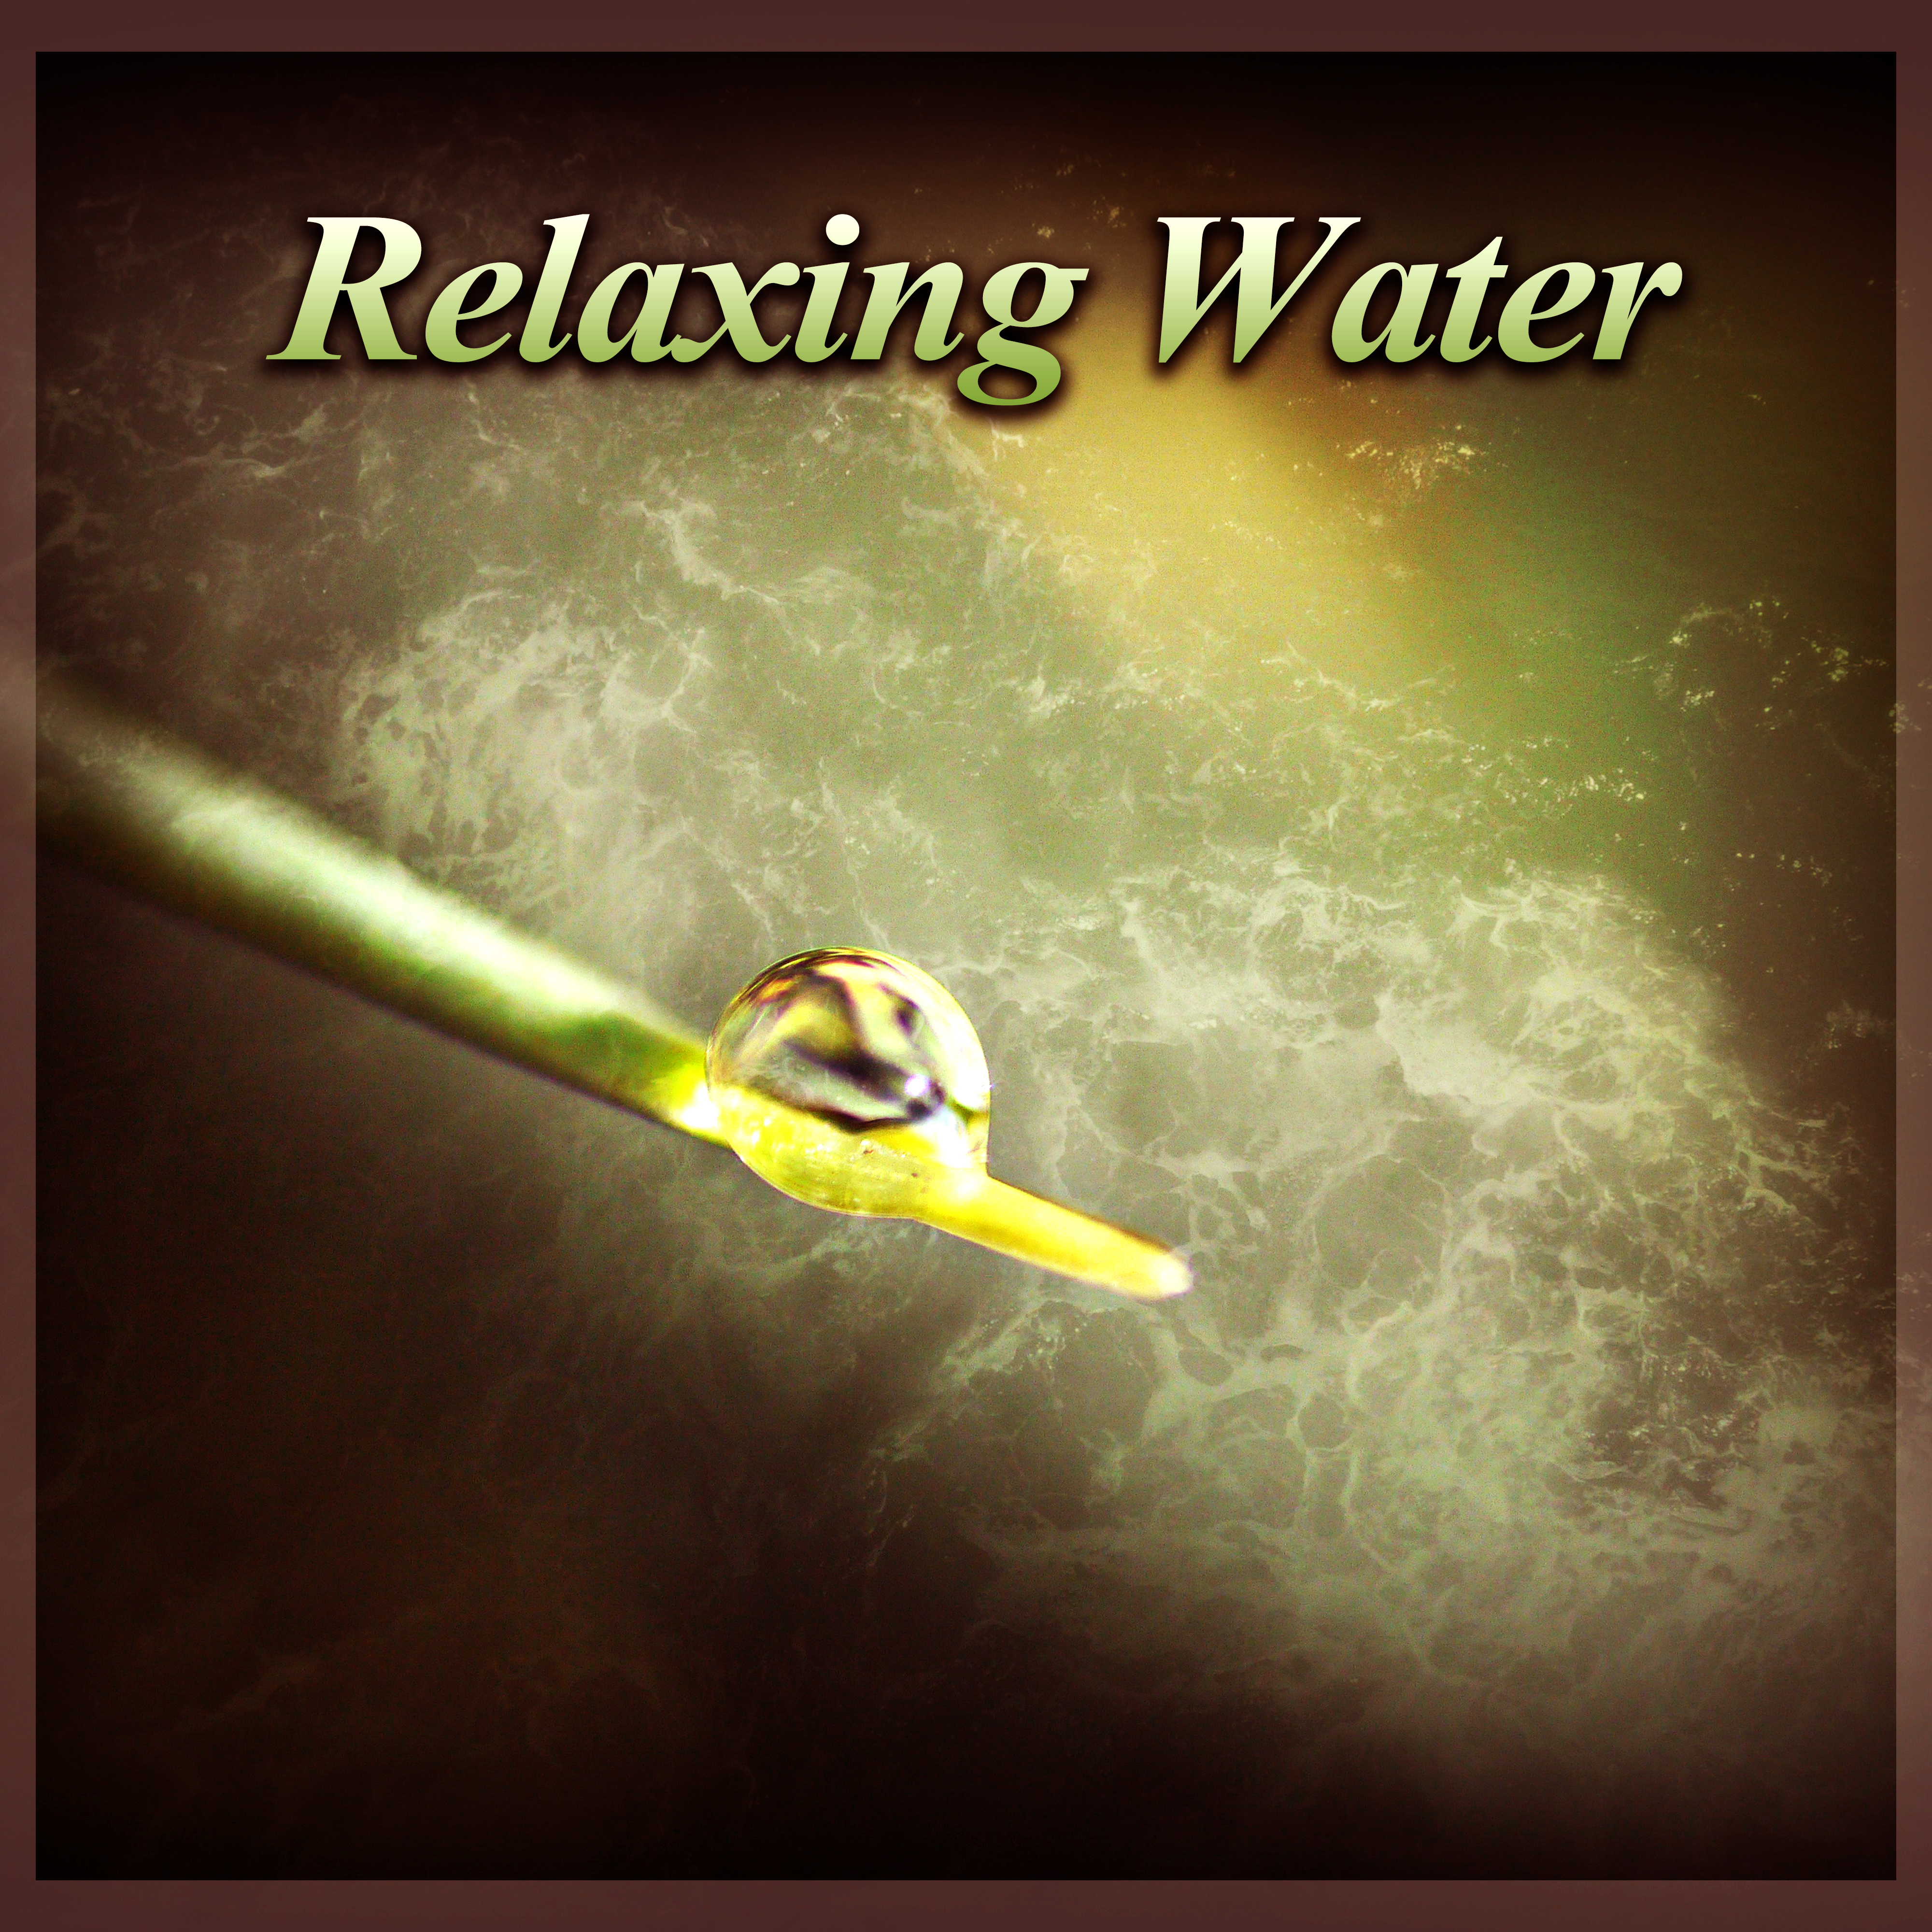 Relaxing Water  Nature Sounds of Water, Pure Relax with Ocean Waves, Tranquility Music, Meditation, Spa, Relaxation Therapy